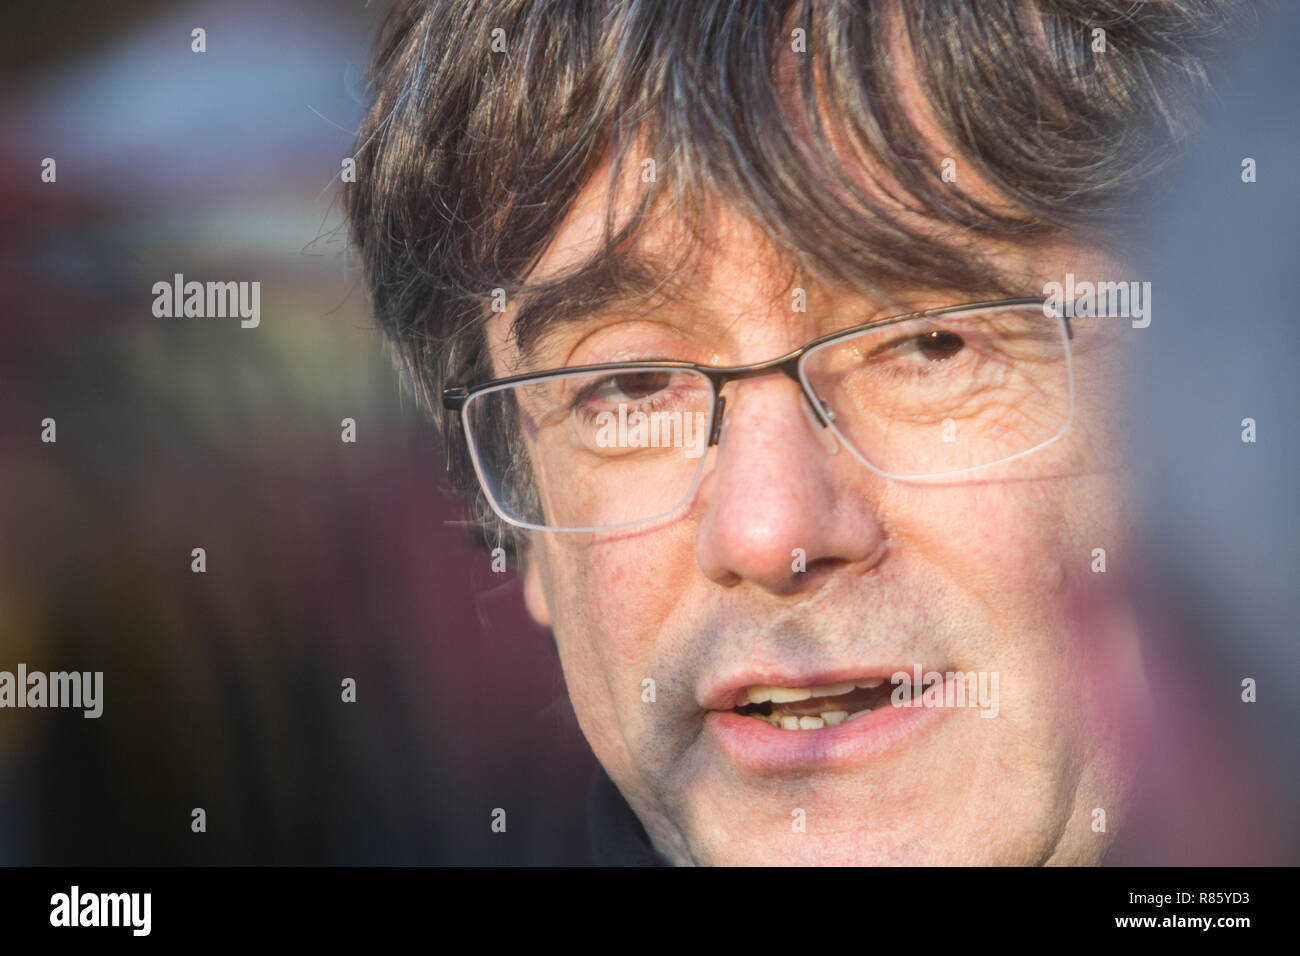 London UK. 13th December 2018. Carles Puigdemont, who served as President of the Government of Catalonia from January 2016 to October 2017 and was later removed from office by the Spanish Government following the unilateral Catalan declaration of independence gives interviews in College Green  Westminster Credit: amer ghazzal/Alamy Live News Stock Photo